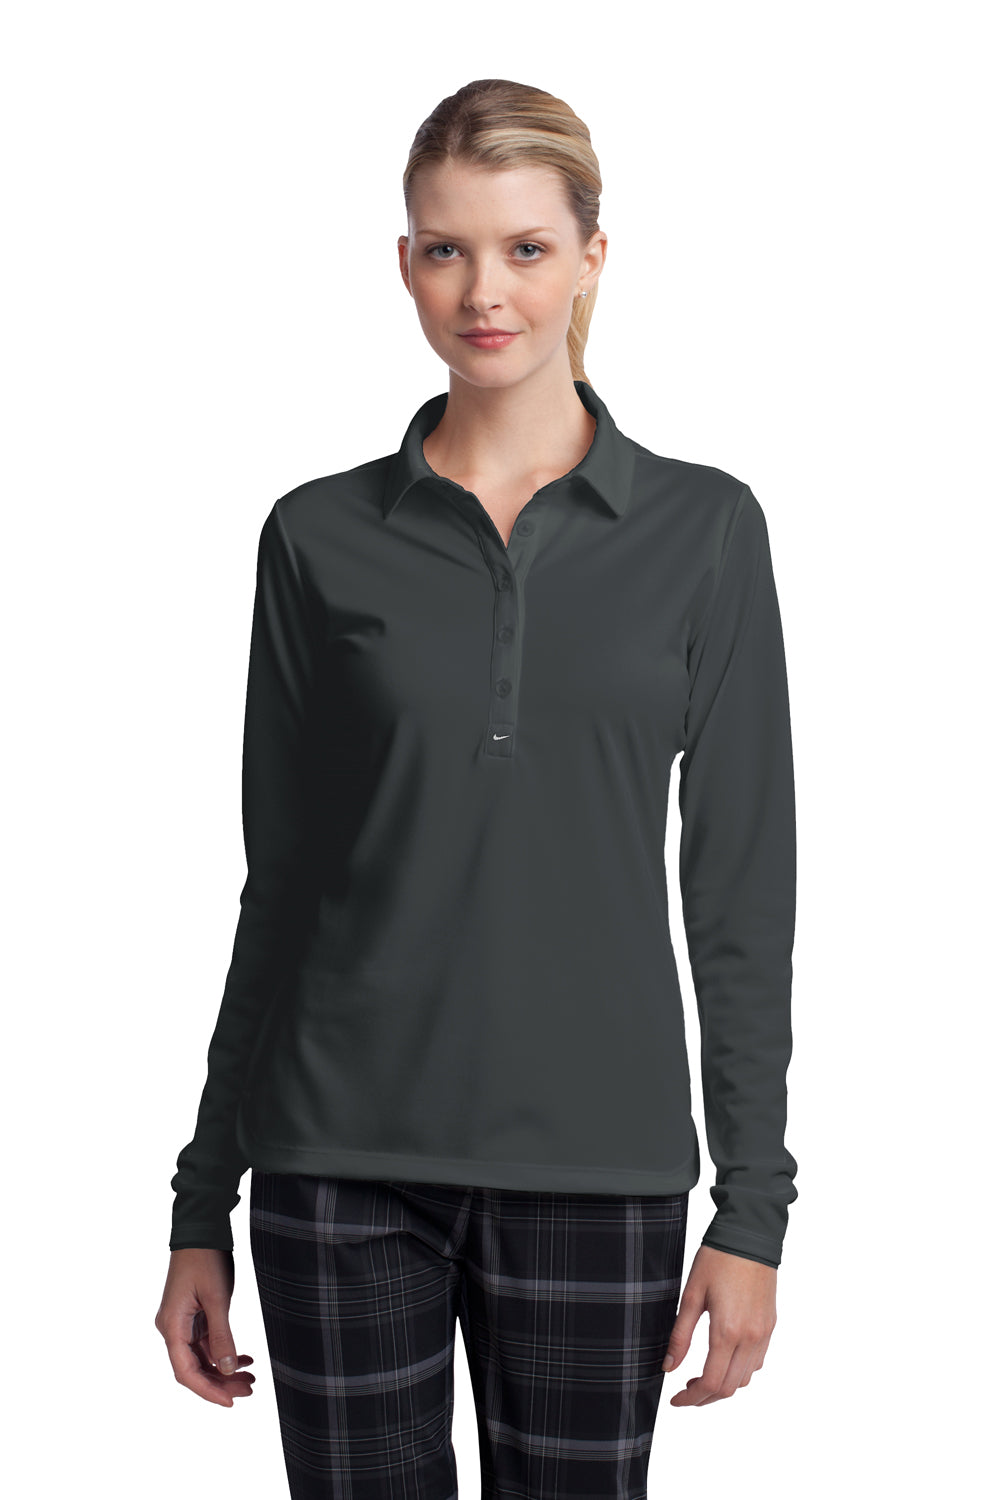 Nike 545322 Womens Stretch Tech Dri-Fit Moisture Wicking Long Sleeve Polo Shirt Anthracite Grey Model Front